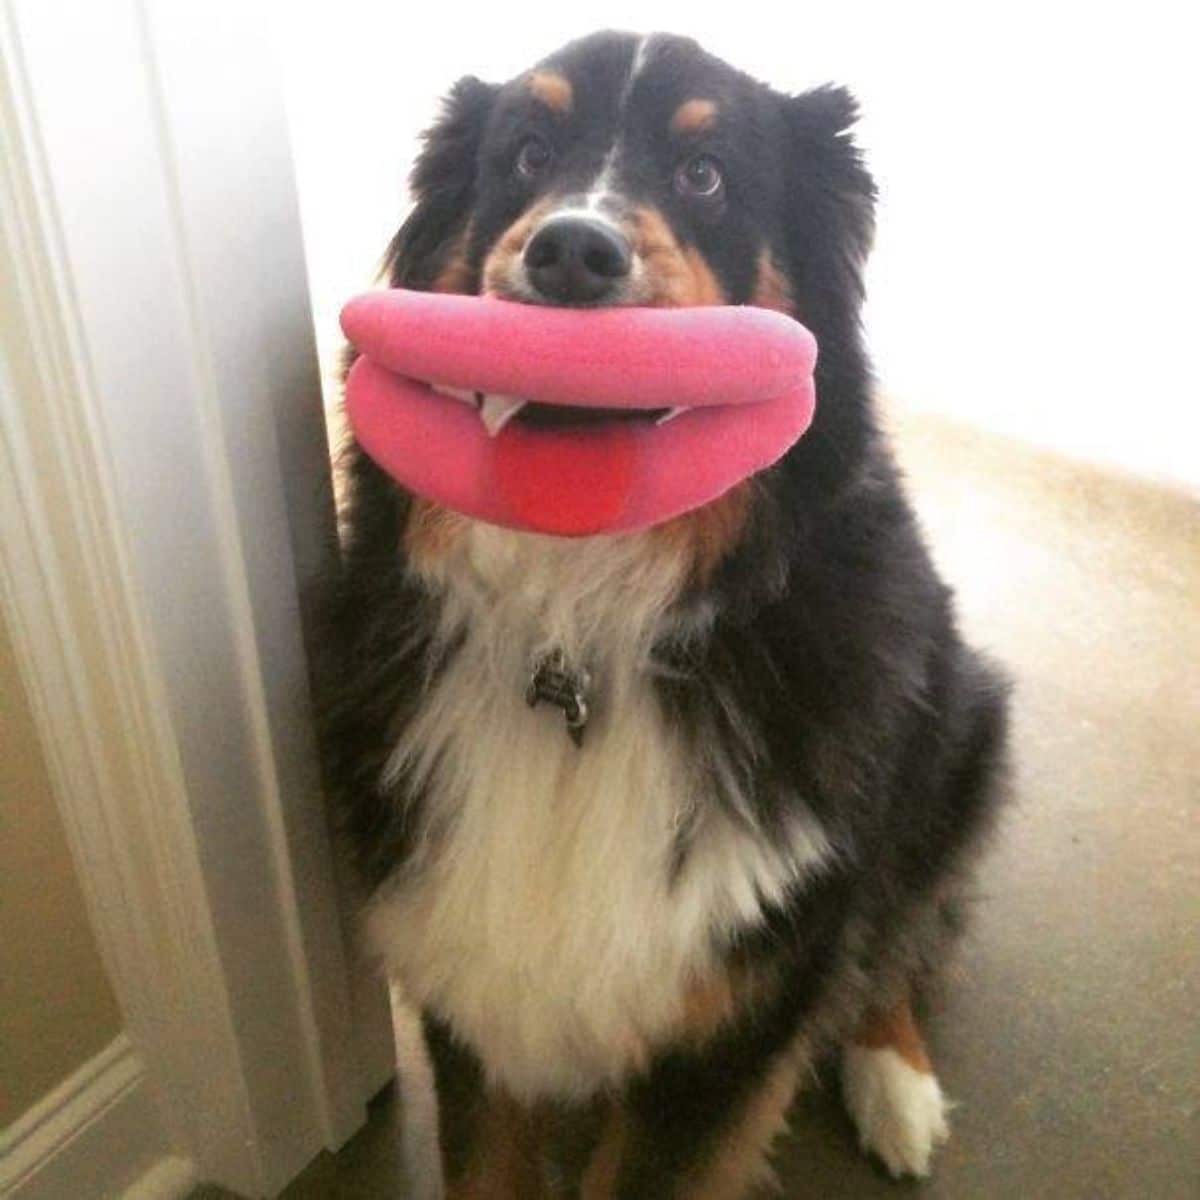 fluffy black brown and white bernese mountain dog with a large pink lip toy in its mouth